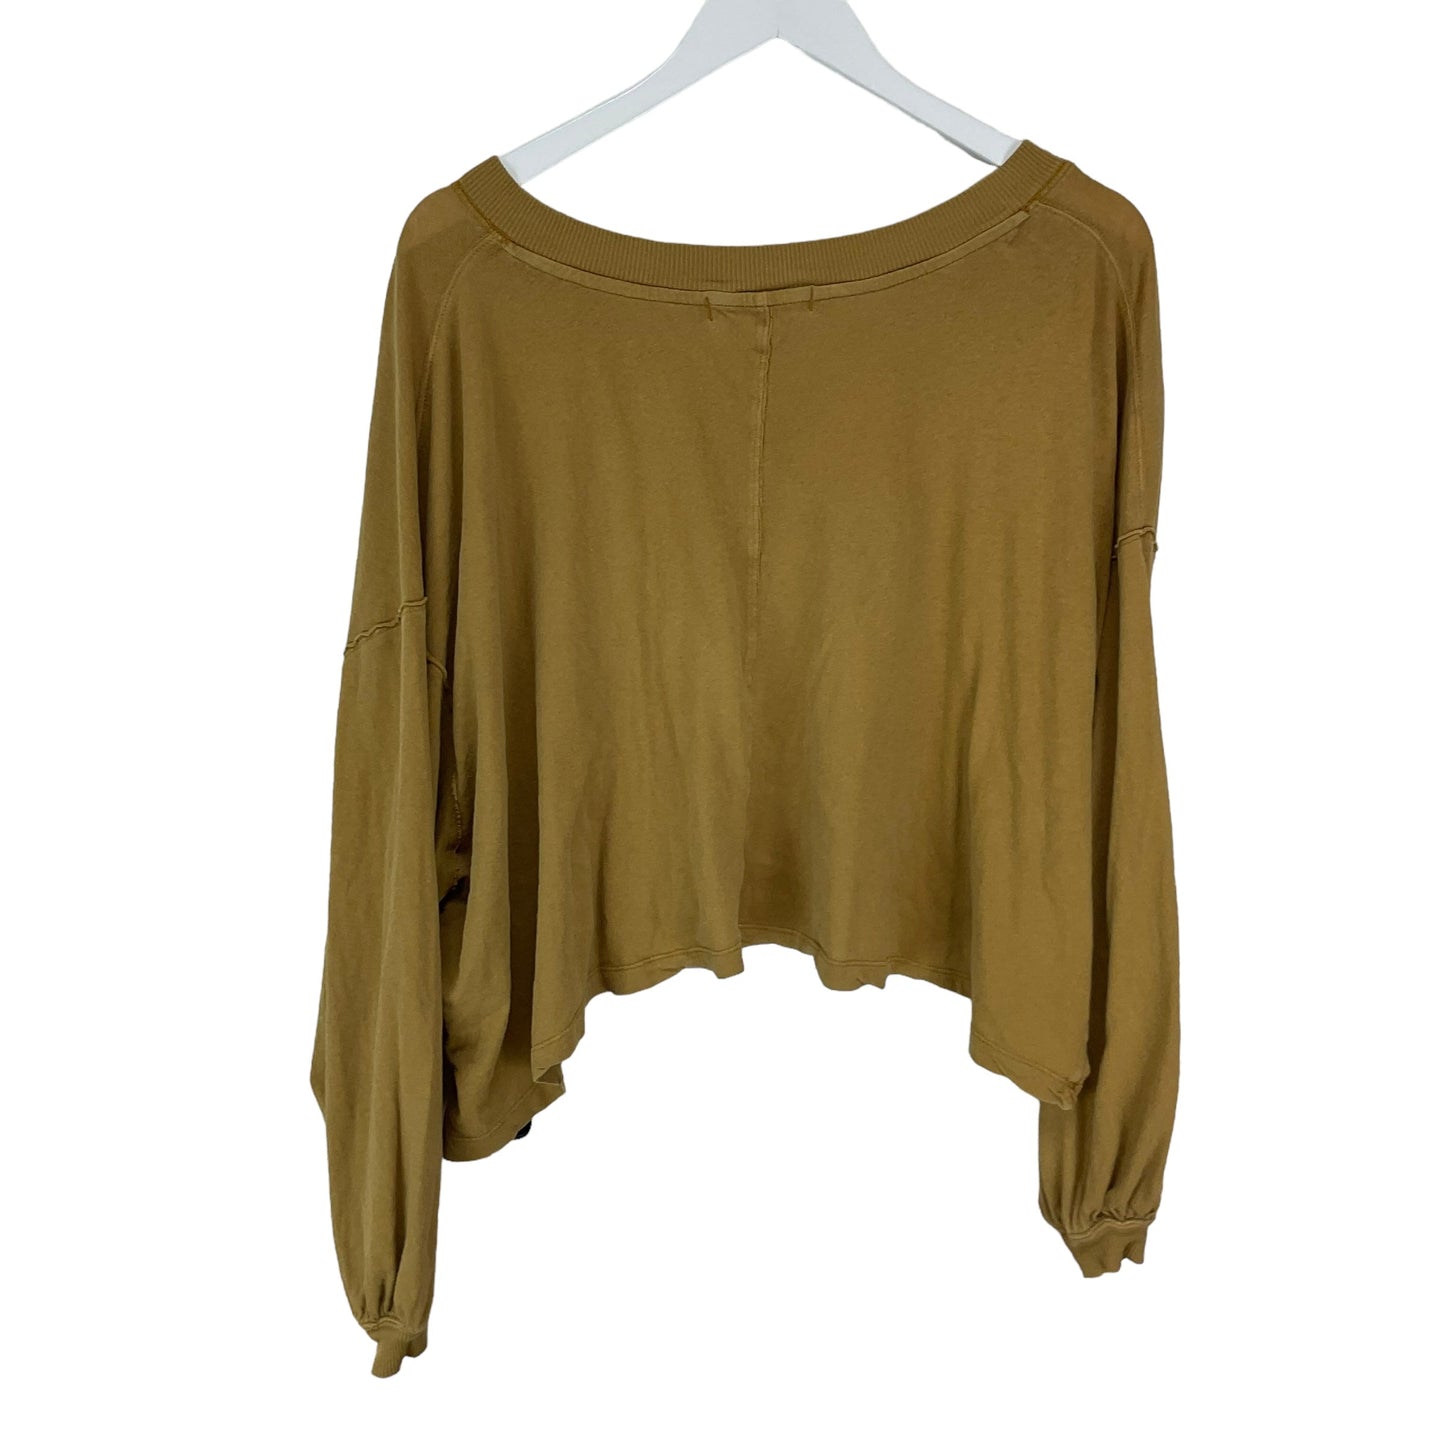 Yellow Top Long Sleeve We The Free, Size Xs